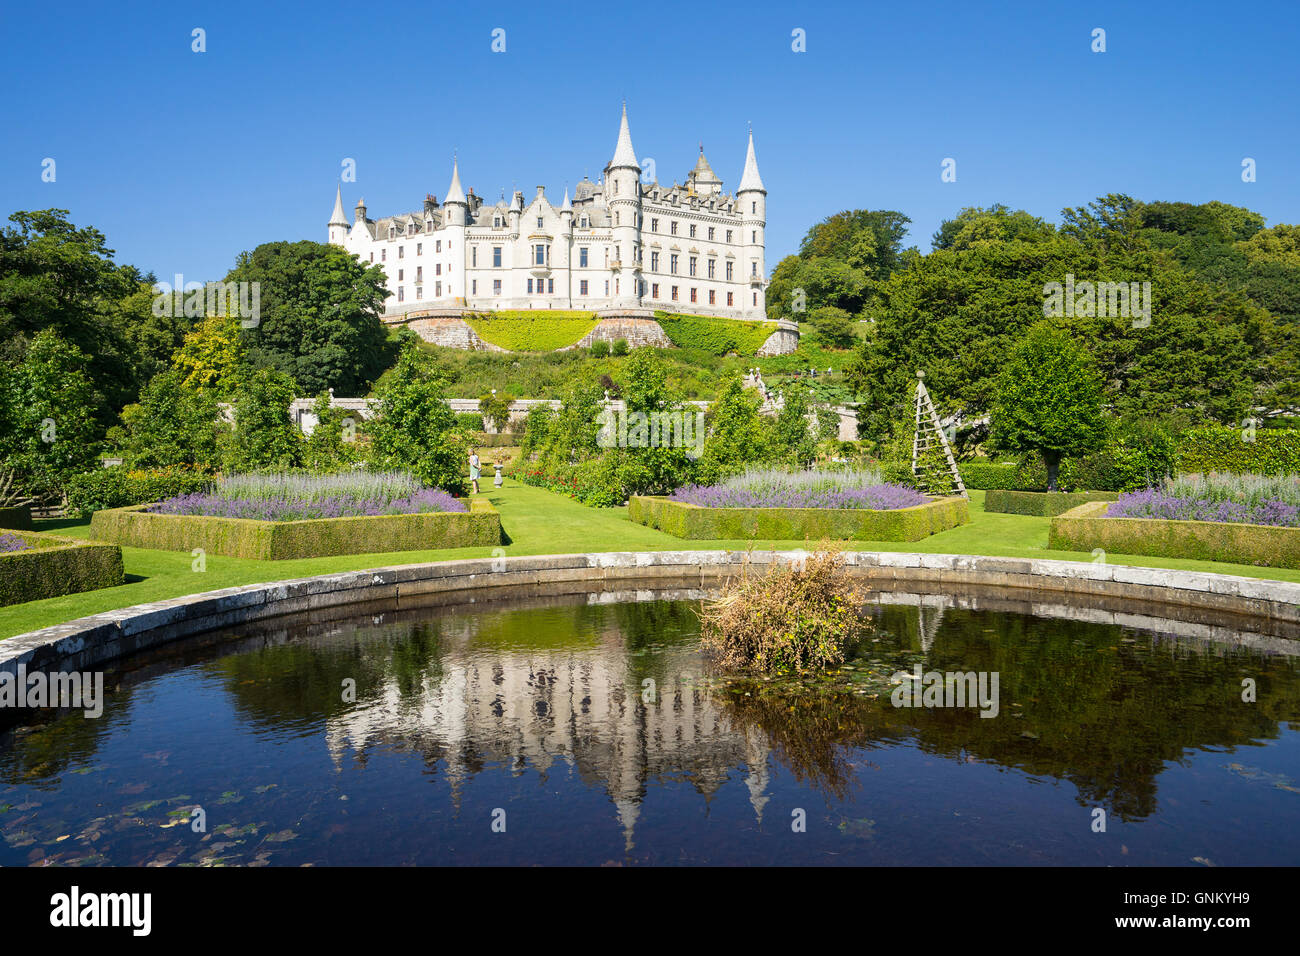 Dunrobin Castle with pond and gardens at Golspie, Highland, Scotland. Castle is seat of the Earl of Sutherland and the Clan Suth Stock Photo